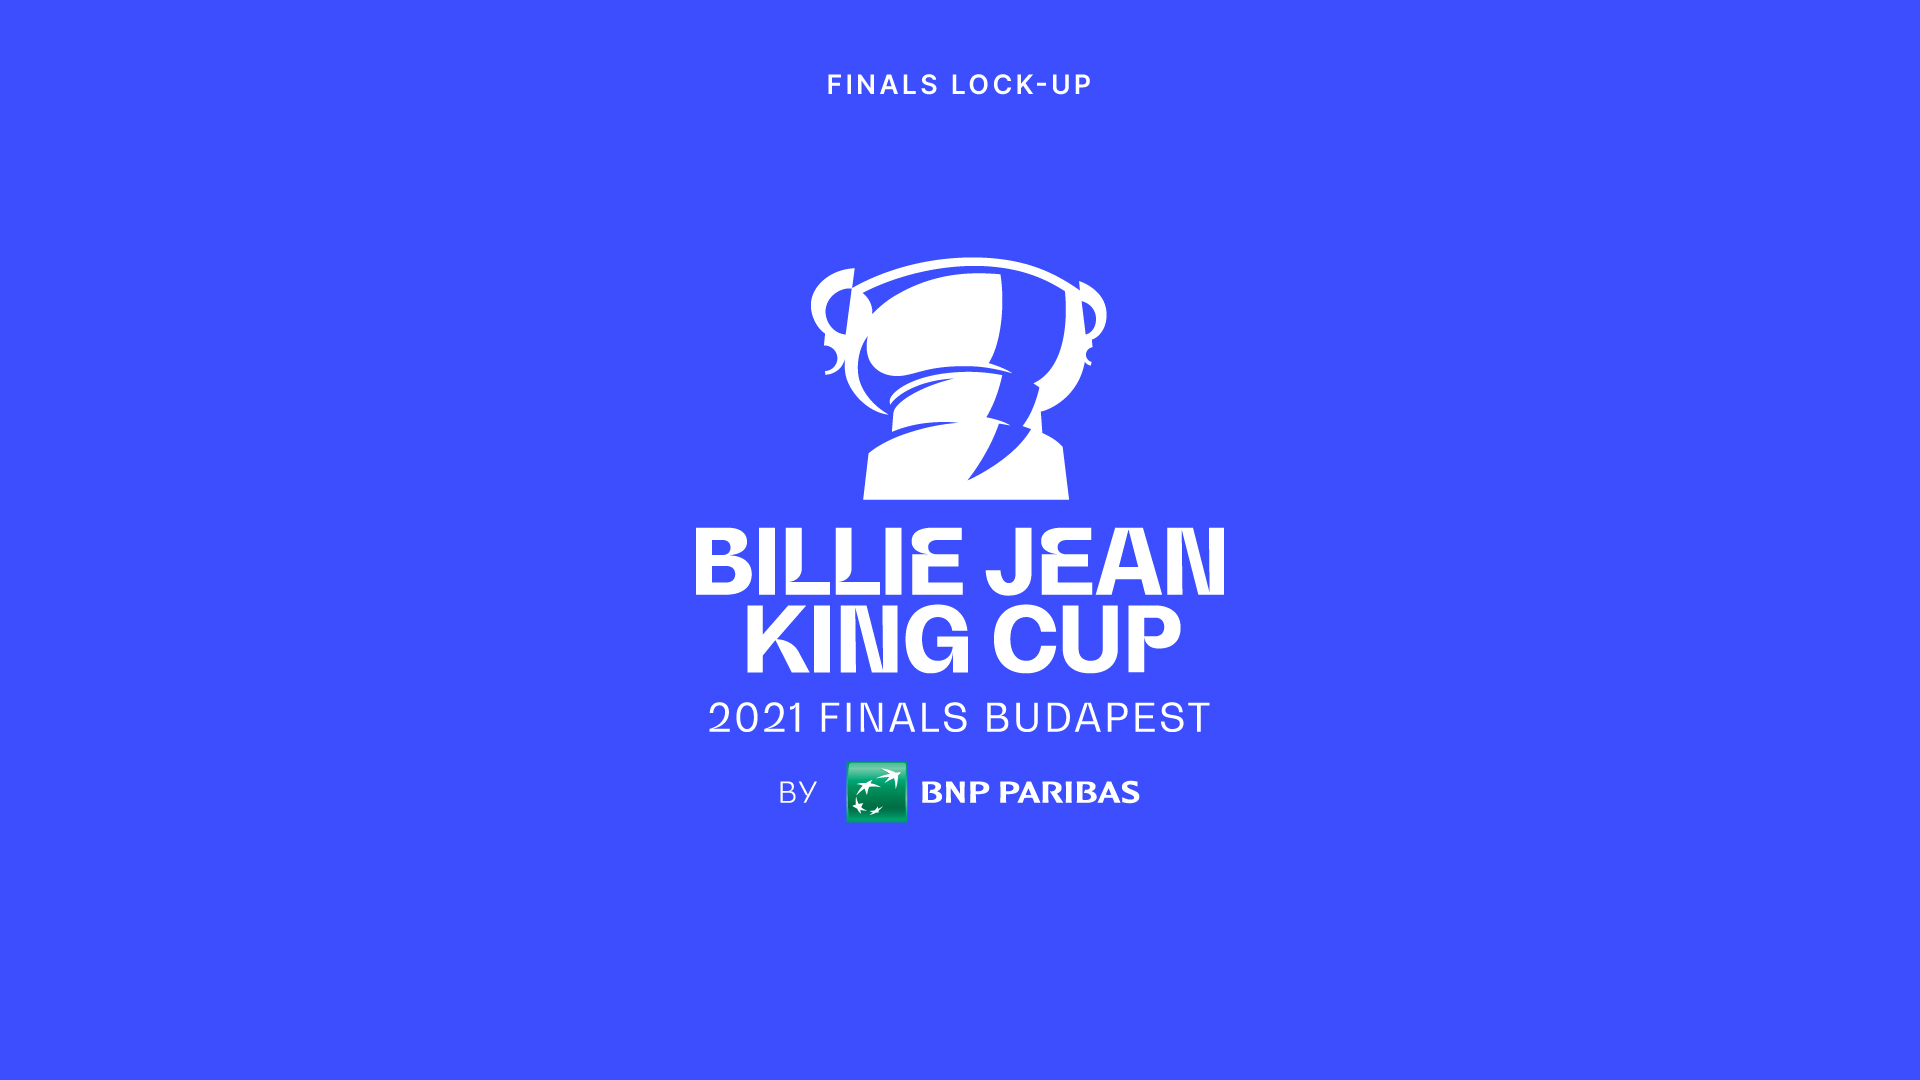 Billie Jean King Cup / Fed Cup Will Now Be Called Billie Jean King Cup